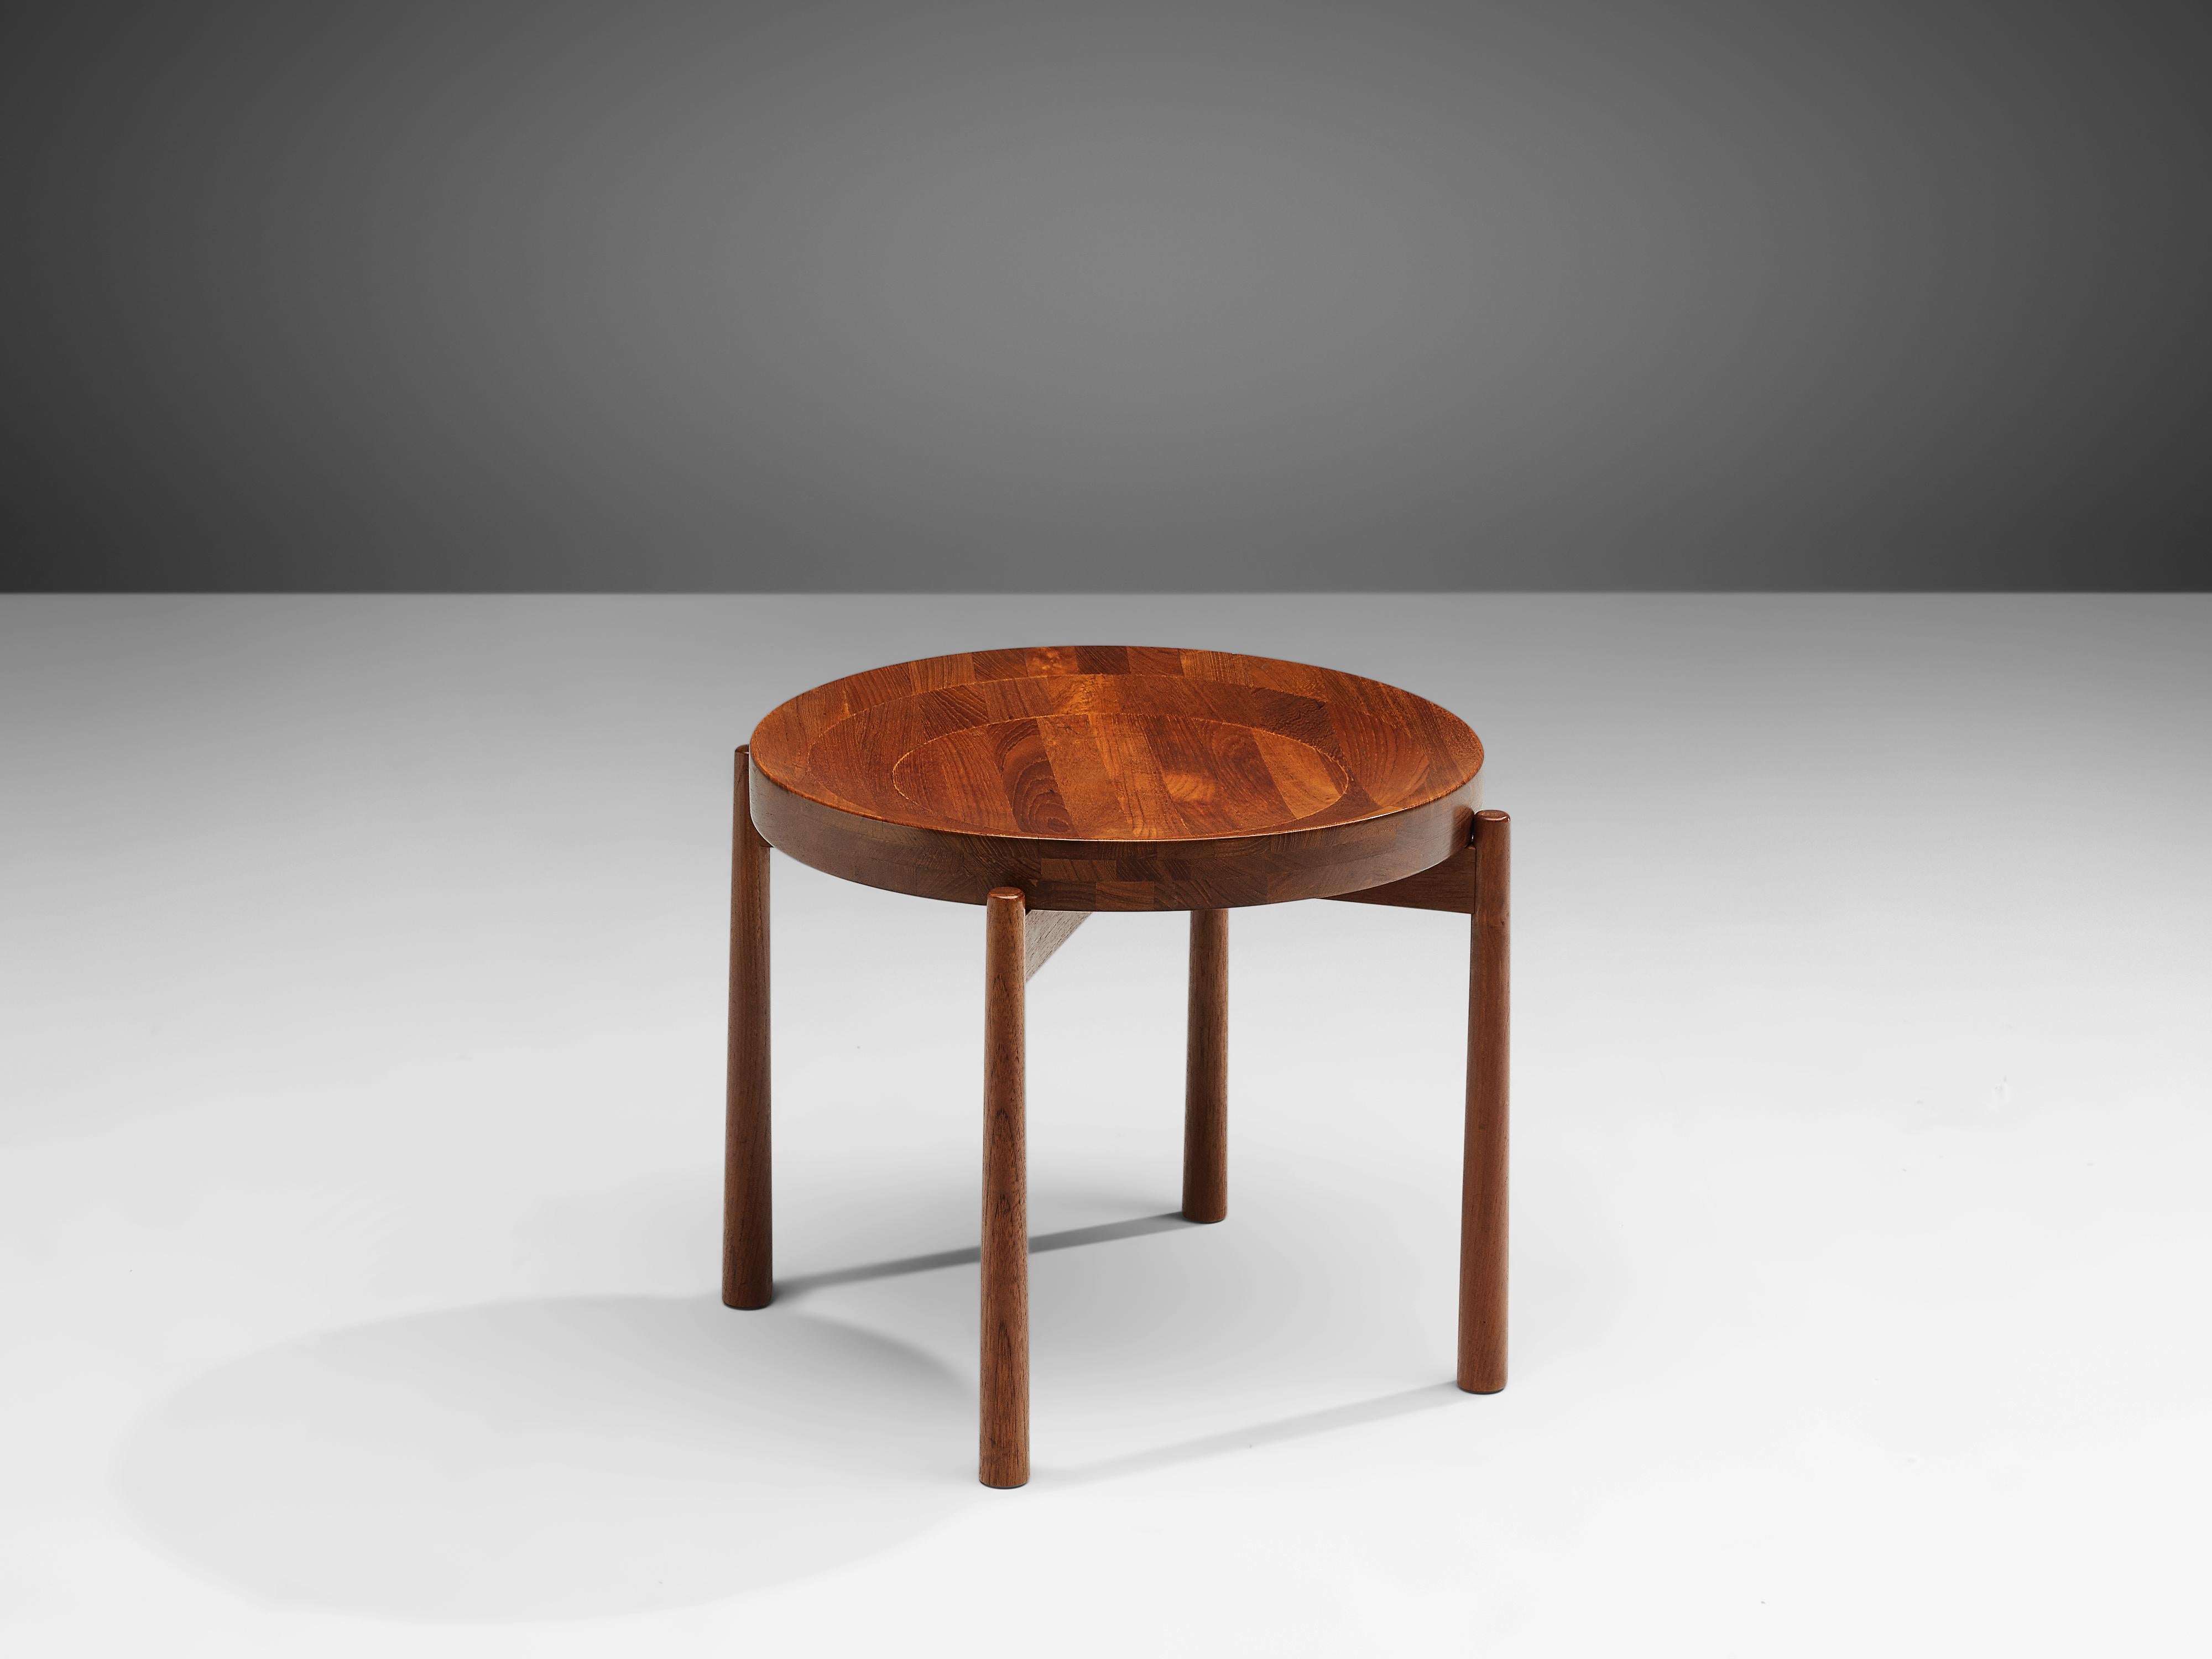 Side table in teak by Jens Harald Quistgaard for Nissen, Denmark, 1960s.

This exquisite side table features round a round teak top that is slightly denting towards the middle, making the table top resemble a bowl. The legs of the table is joint